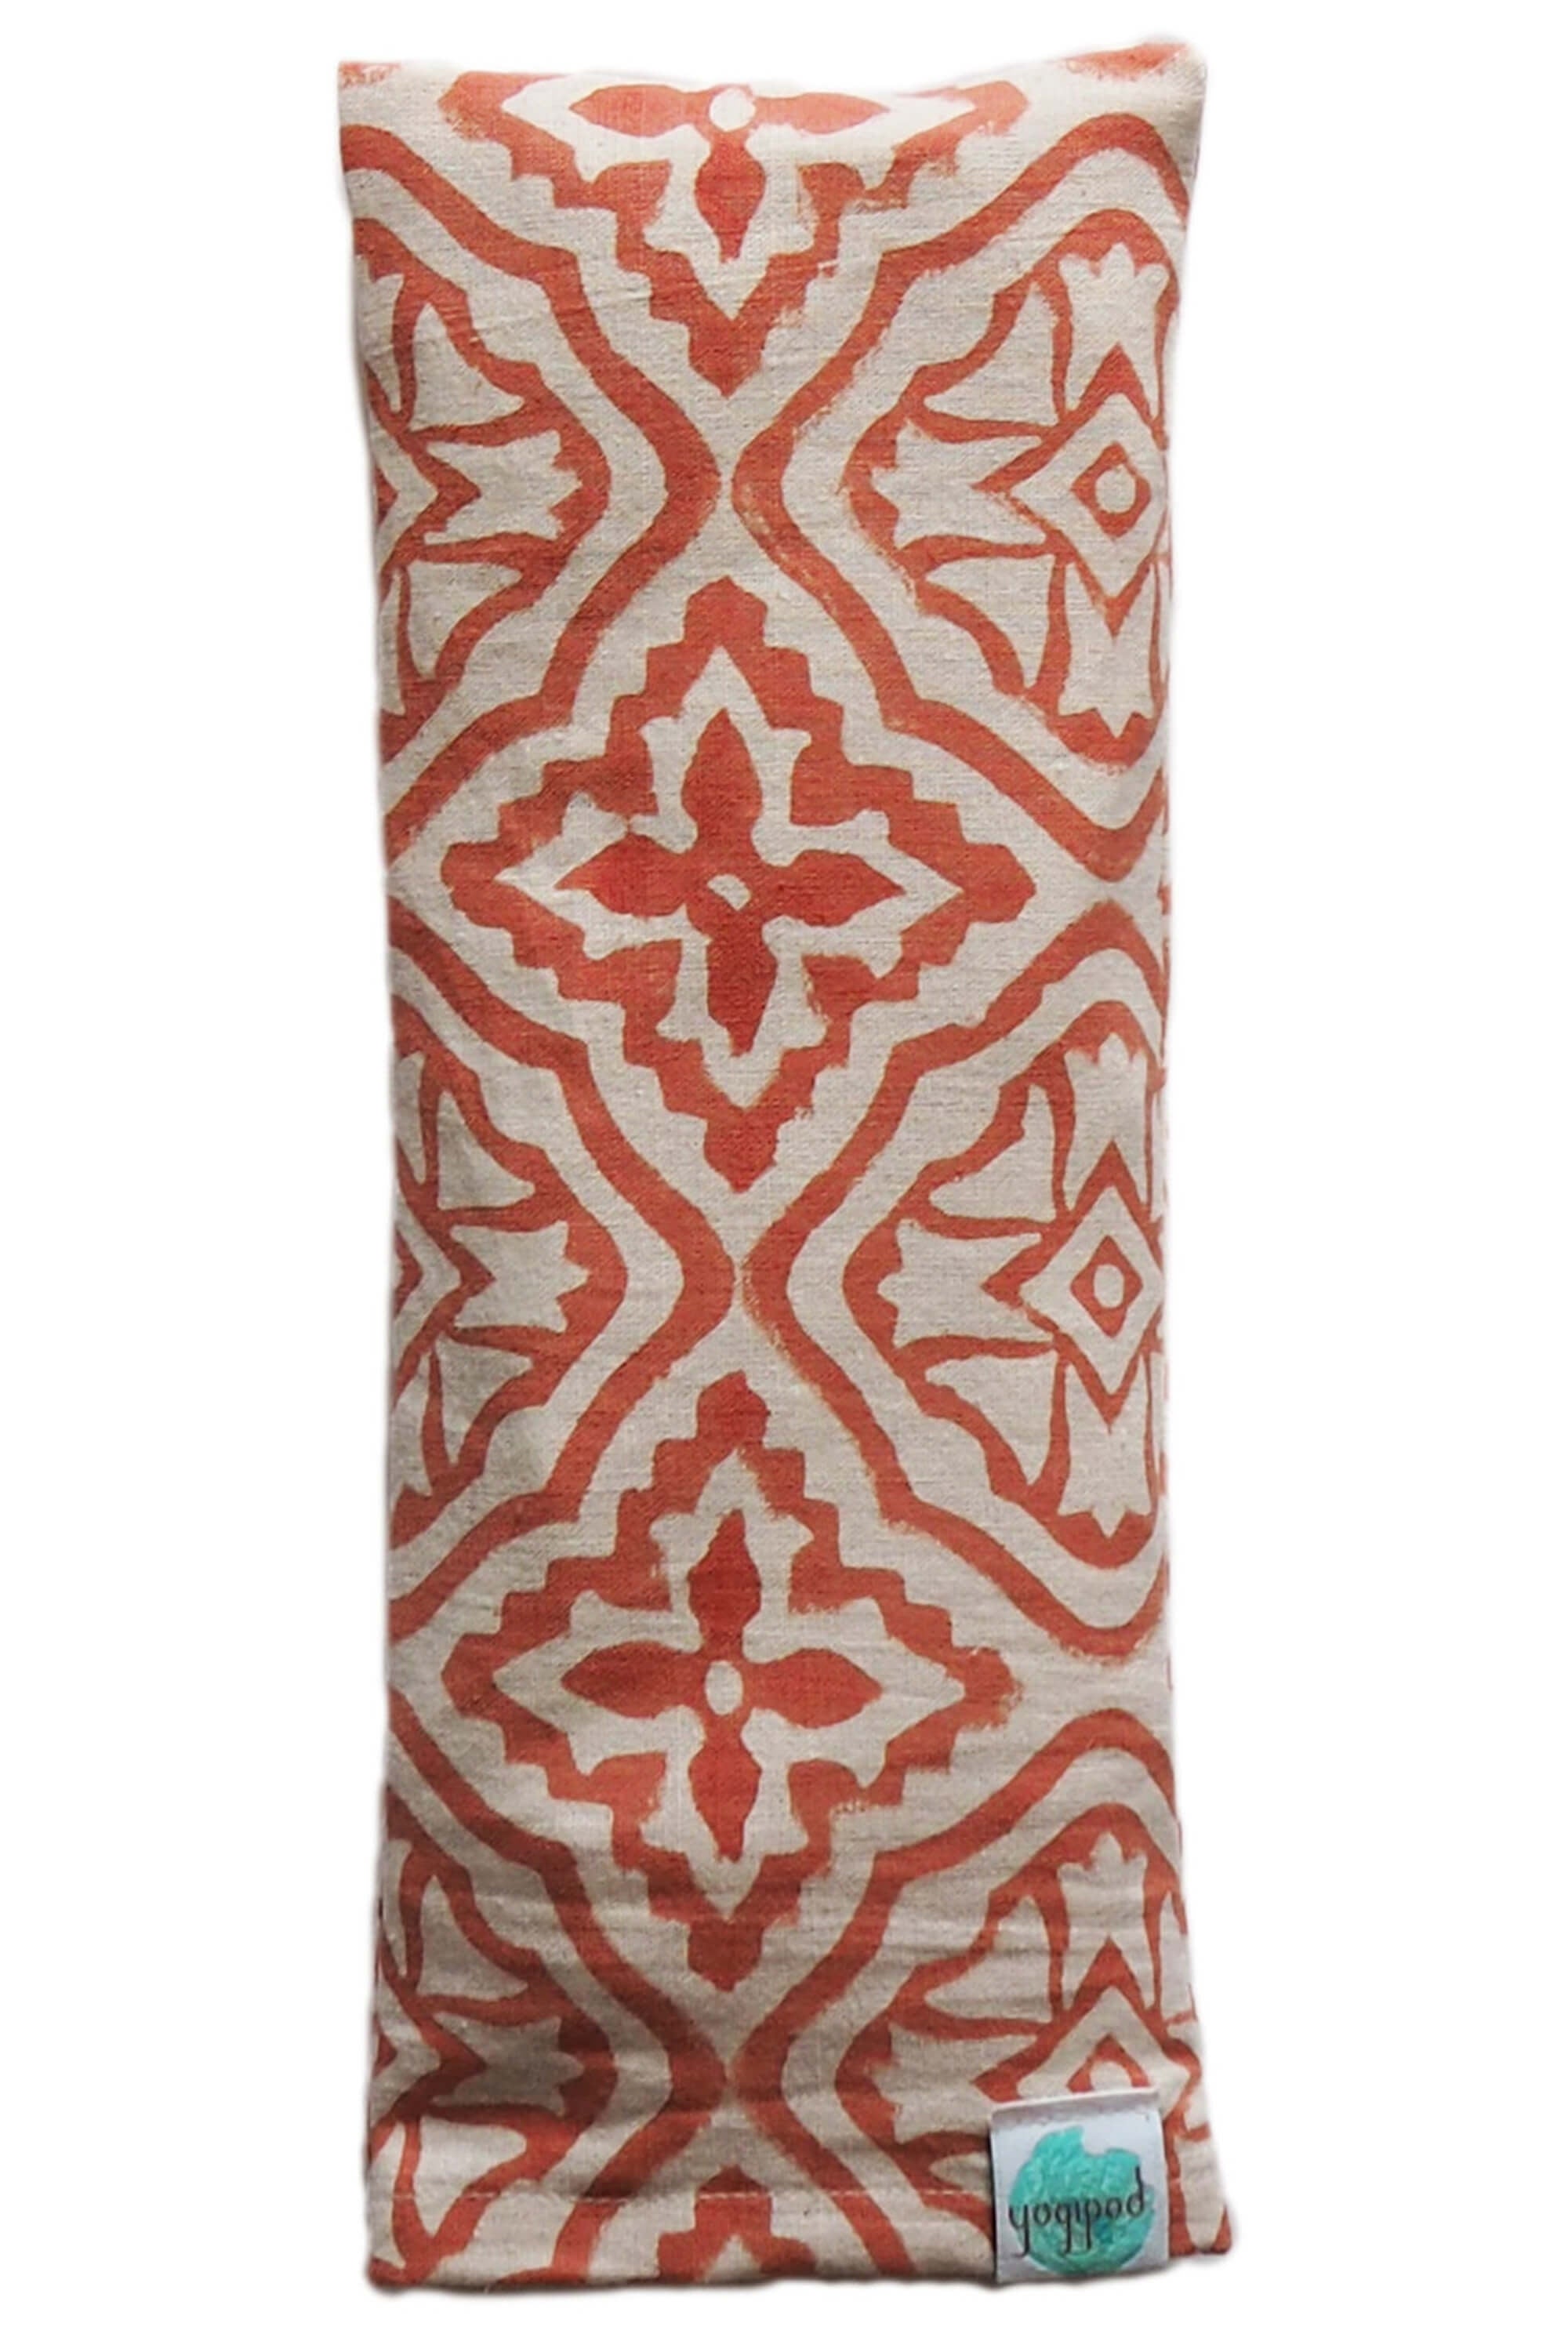 Handcrafted eye pillow from Yogi Pod, designed to enhance relaxation. Created in the UK with hand block printed cotton from Rajasthan. Linseed-filled and customizable with calming oils. Versatile for yoga or as decorative and functional home accessories."